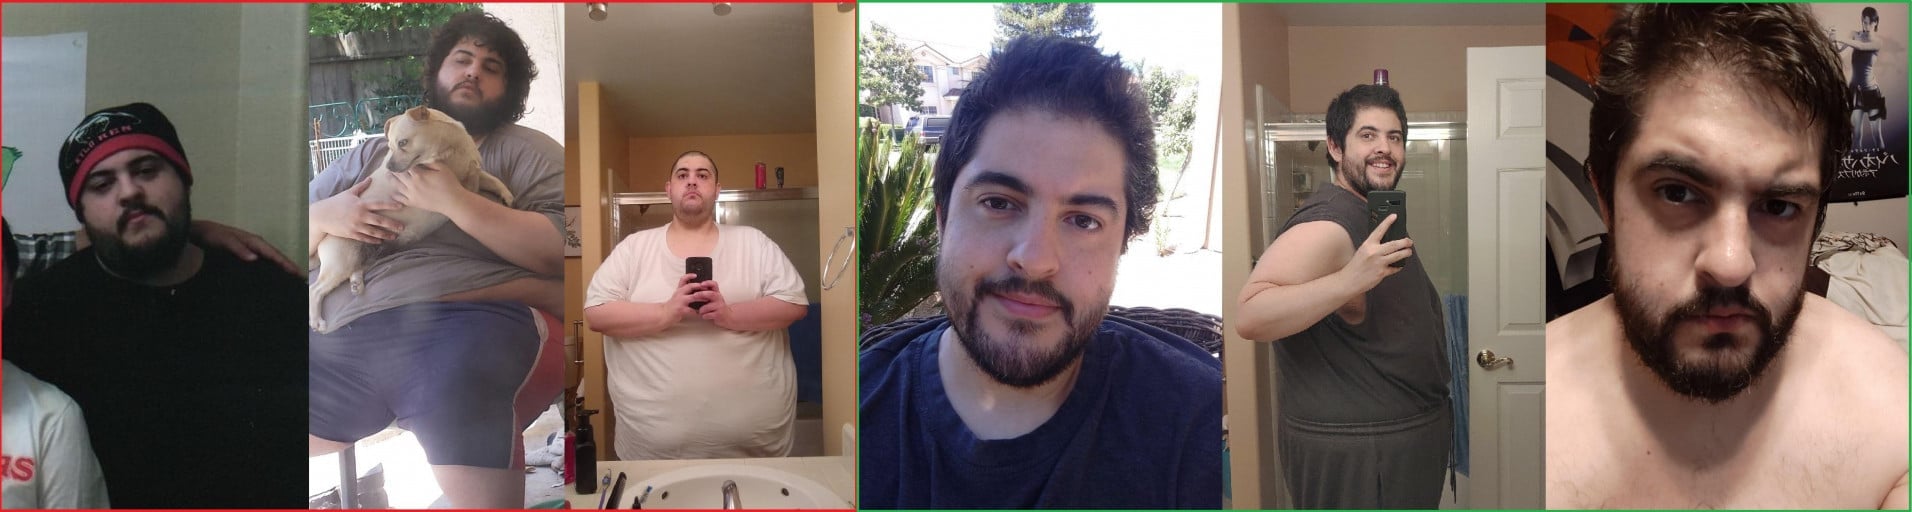 A before and after photo of a 6'0" male showing a weight reduction from 520 pounds to 320 pounds. A net loss of 200 pounds.